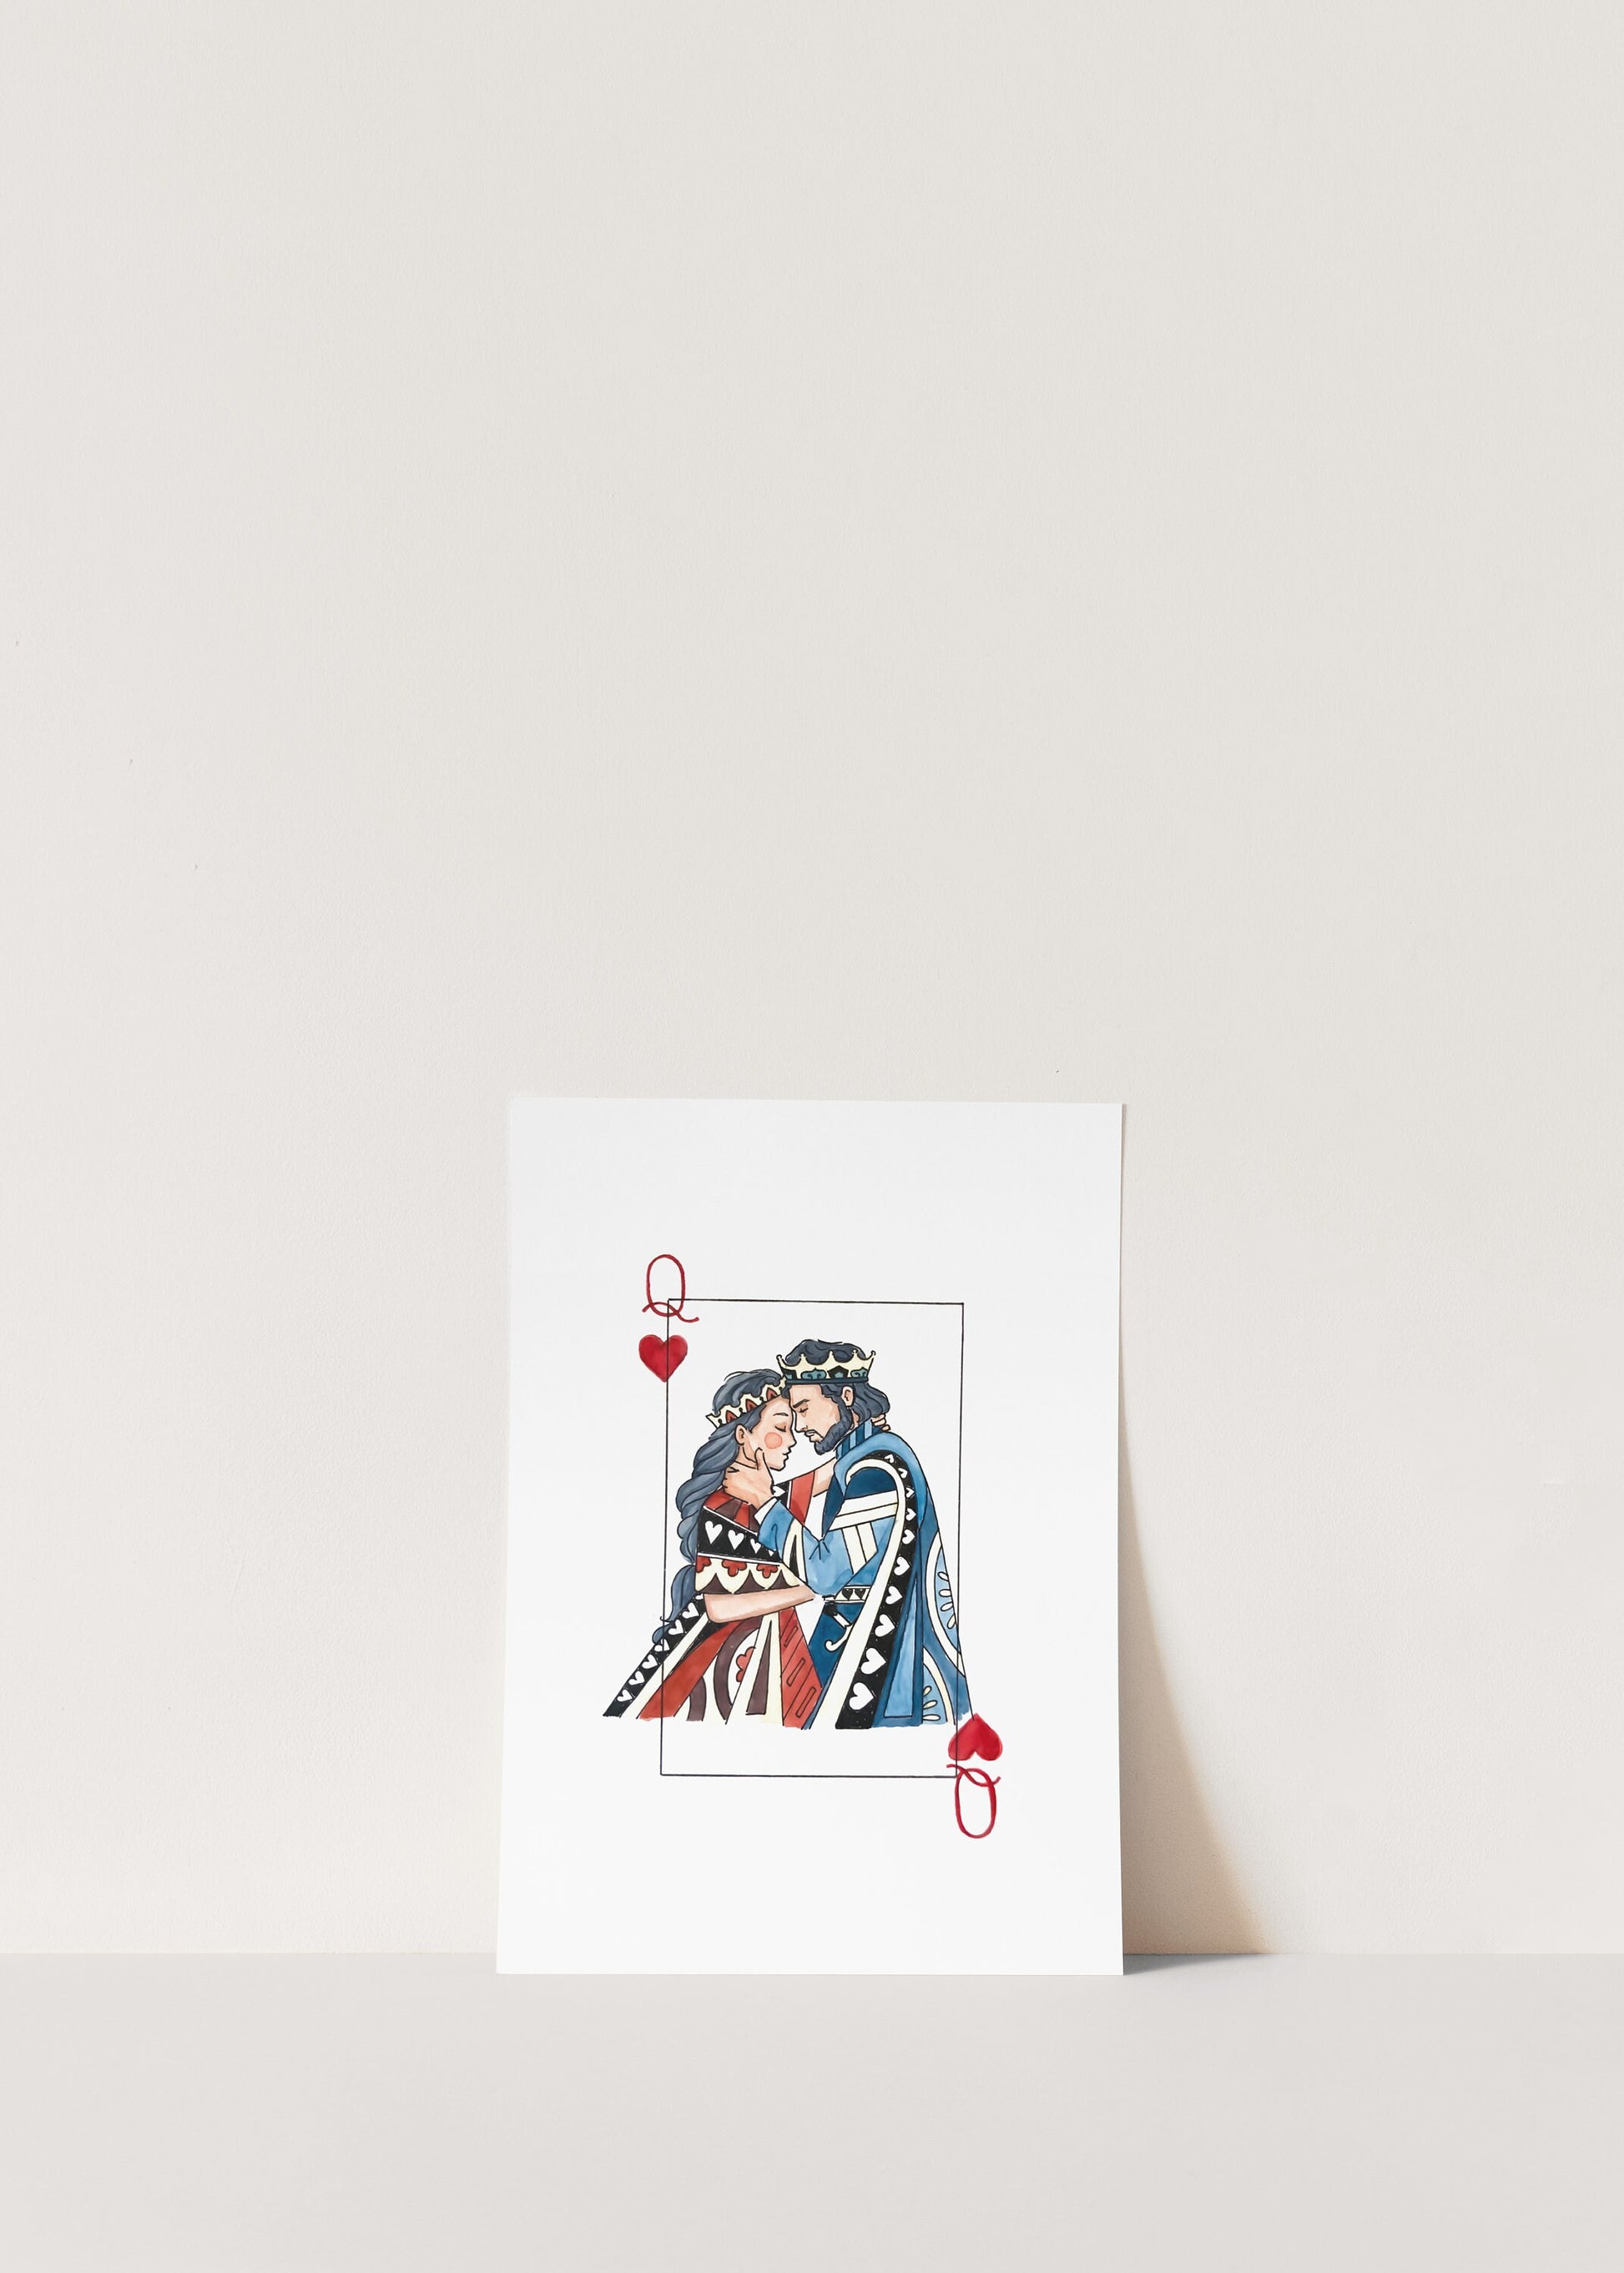 King and Queen Wall Art | Watercolor Illustration | 8x10" 5x7" Art Print | Valentines Gift | King & Queen Playing Cards | Wedding Gift